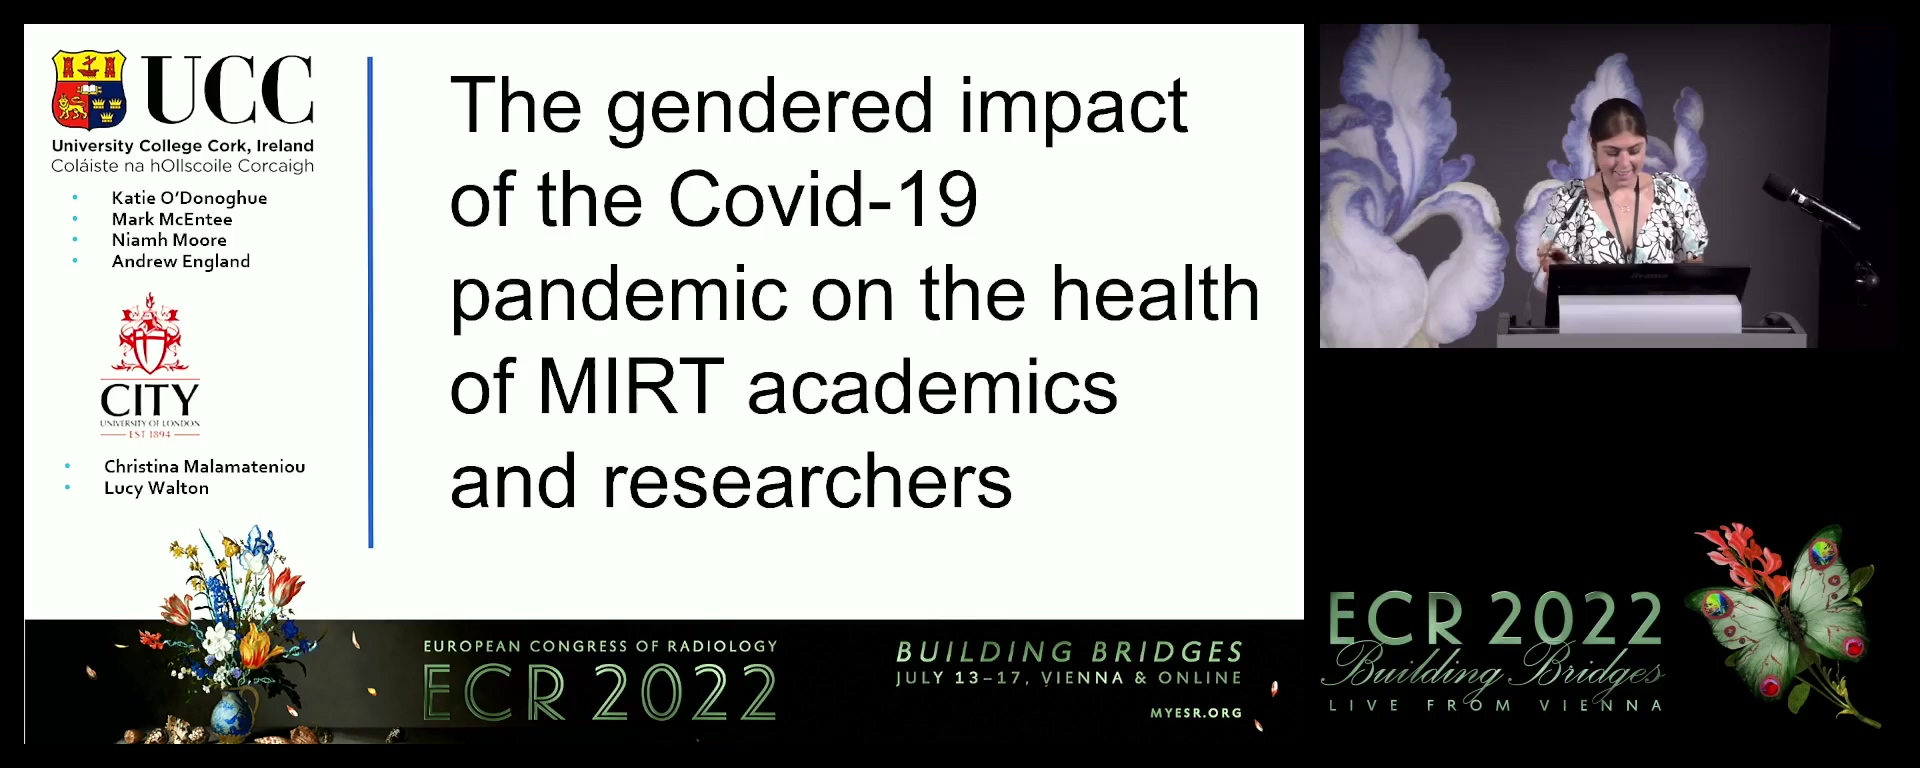 The gendered impact of the Covid-19 pandemic on medical imaging and radiation therapy academics - Katie O'Donoghue, Cork / IE